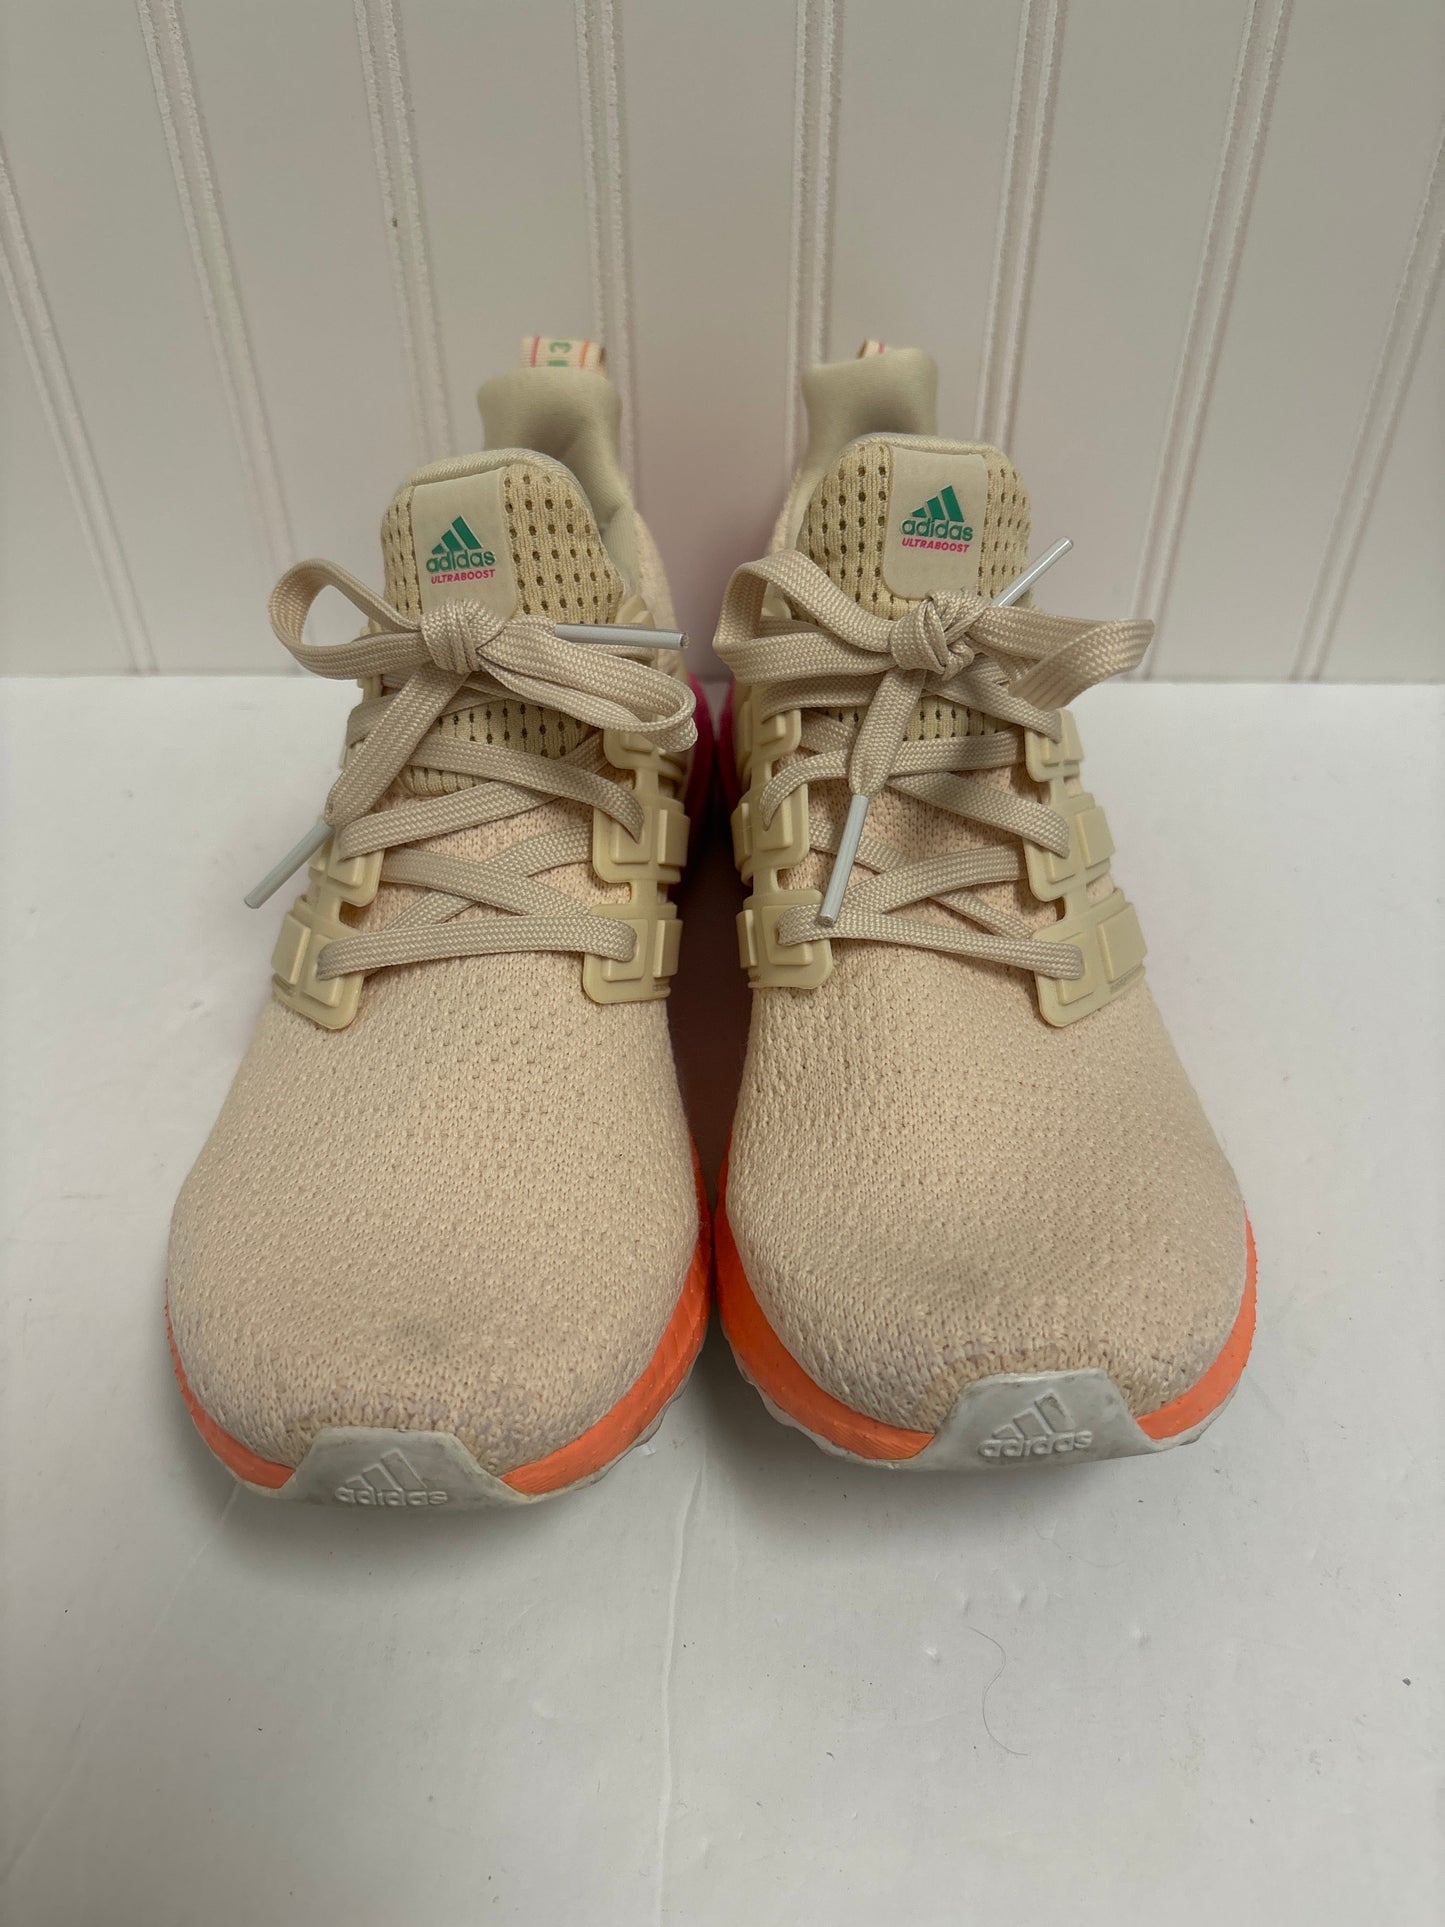 Peach Shoes Athletic Adidas, Size 8